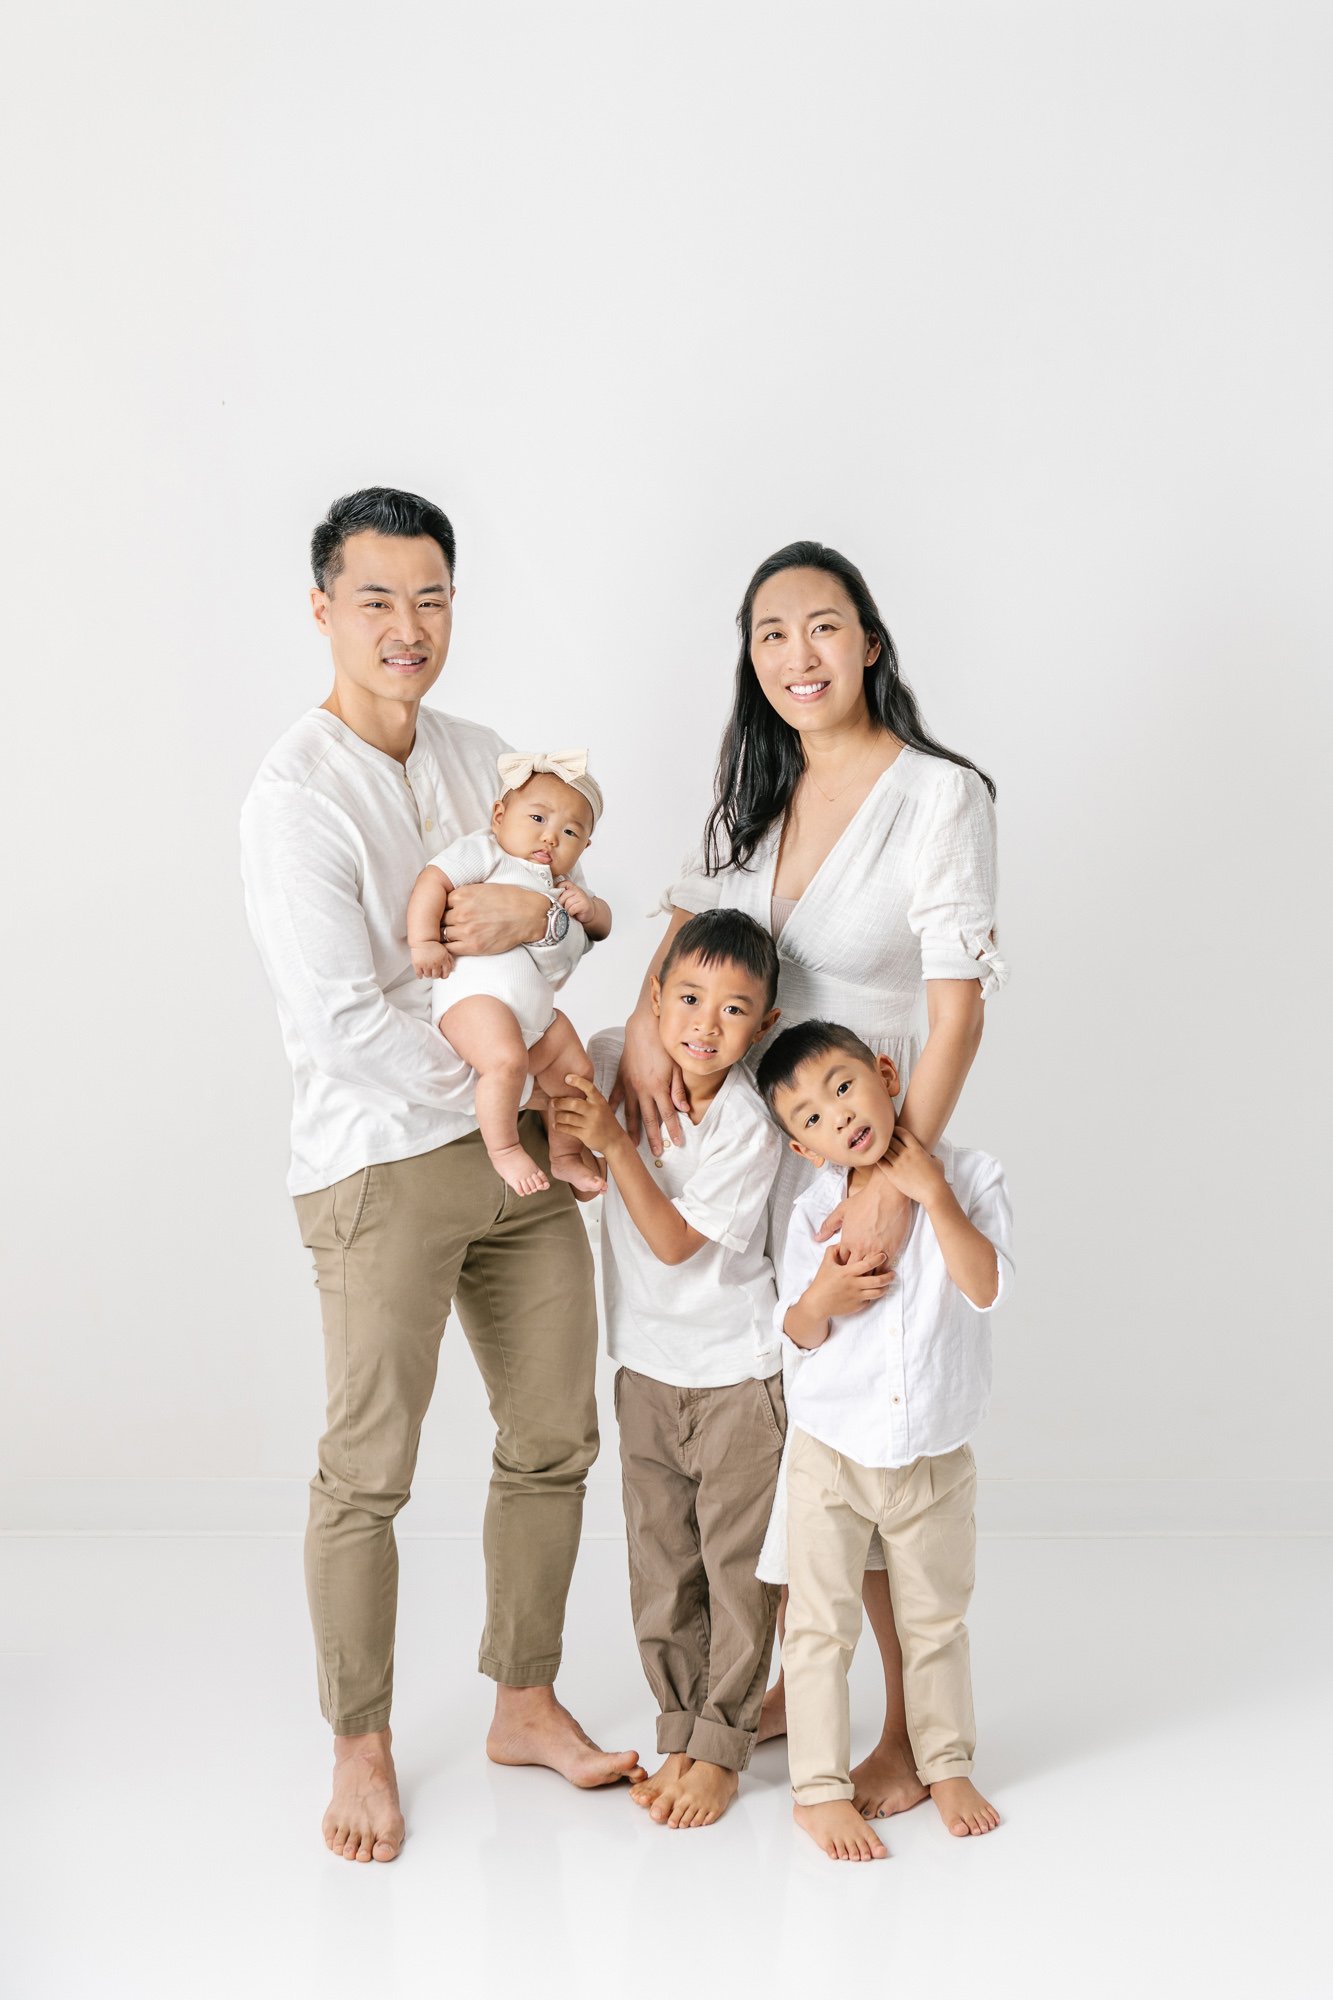    Family picture with a mom, dad, two brothers, and newborn baby sister in studio photography session by Nicole Hawkins Photography in New Jersey. Dad holds baby while mom embraces the older brothers #studionewborns #studioportraits #babystudioportr